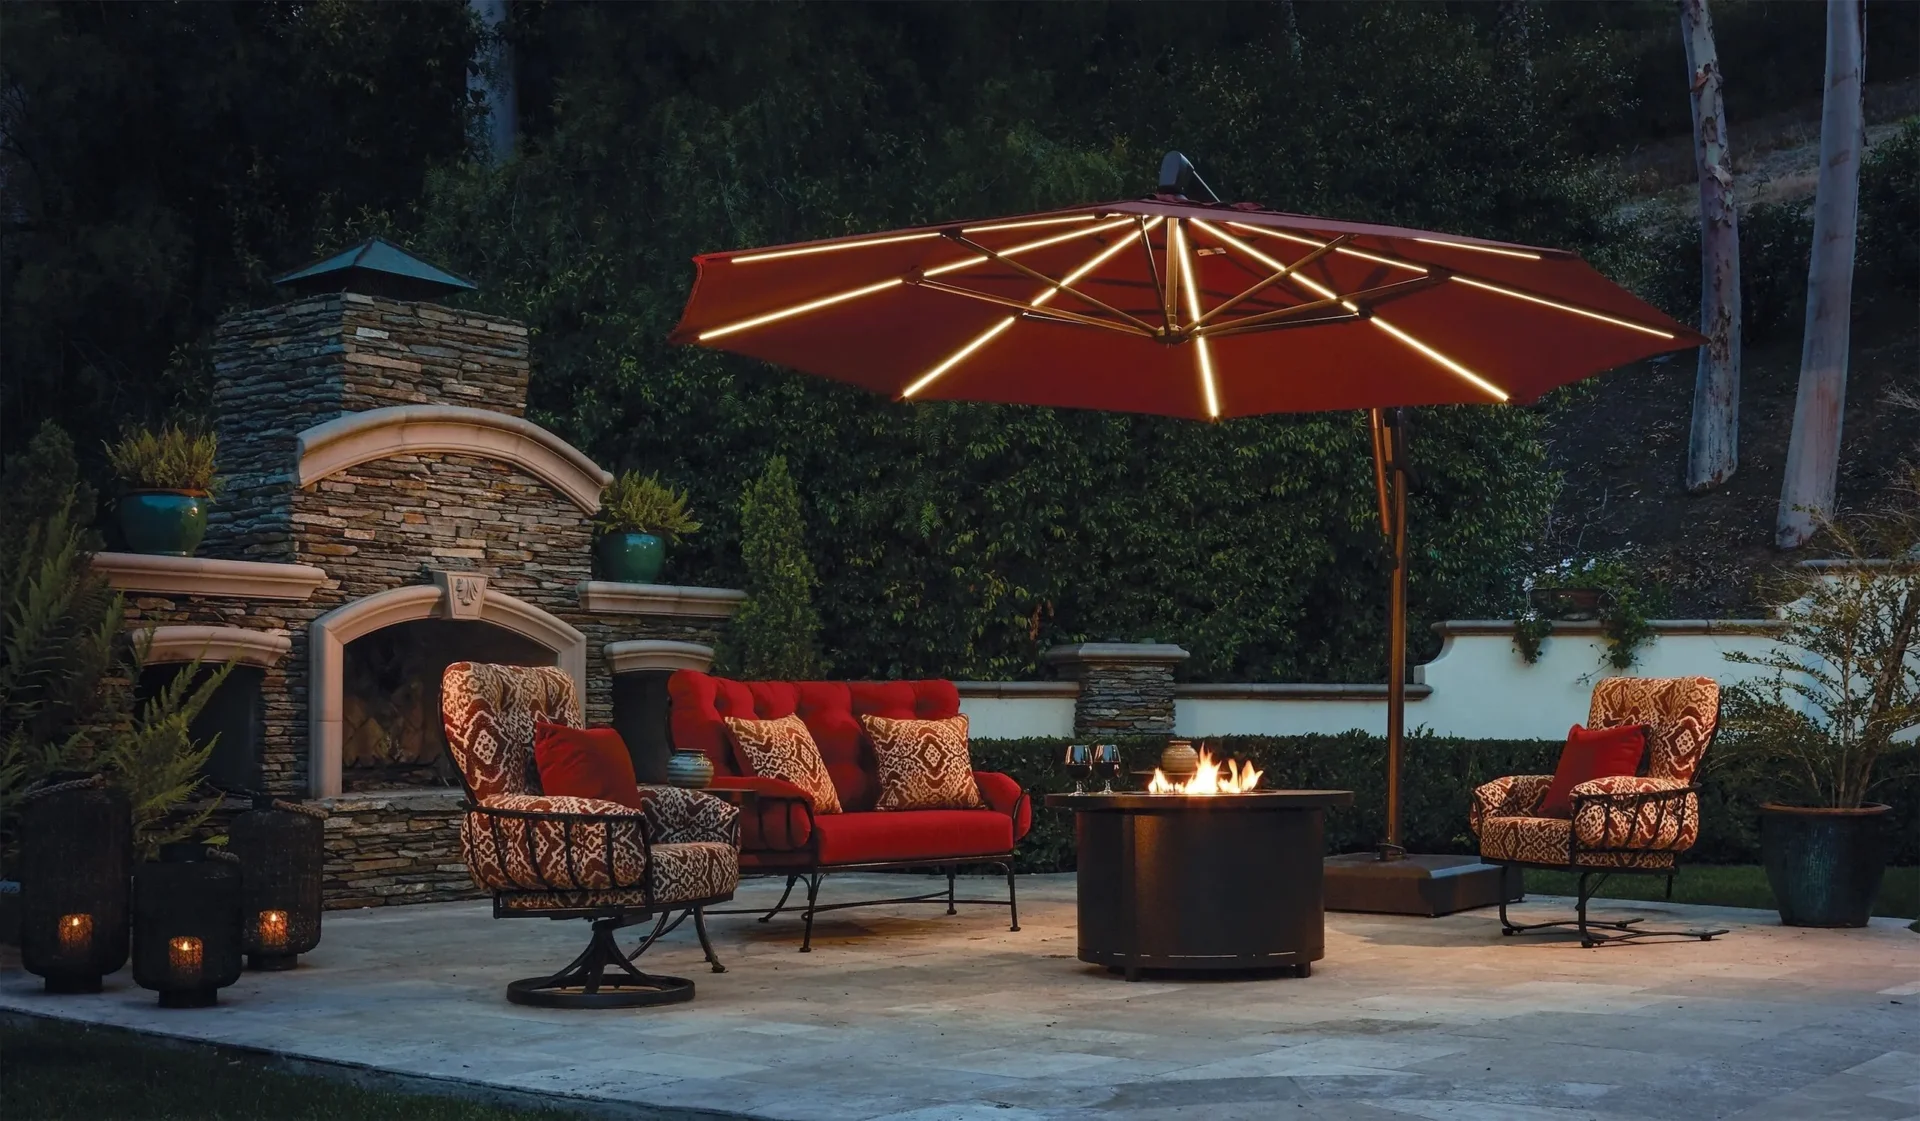 A patio with fire pit and red umbrella.